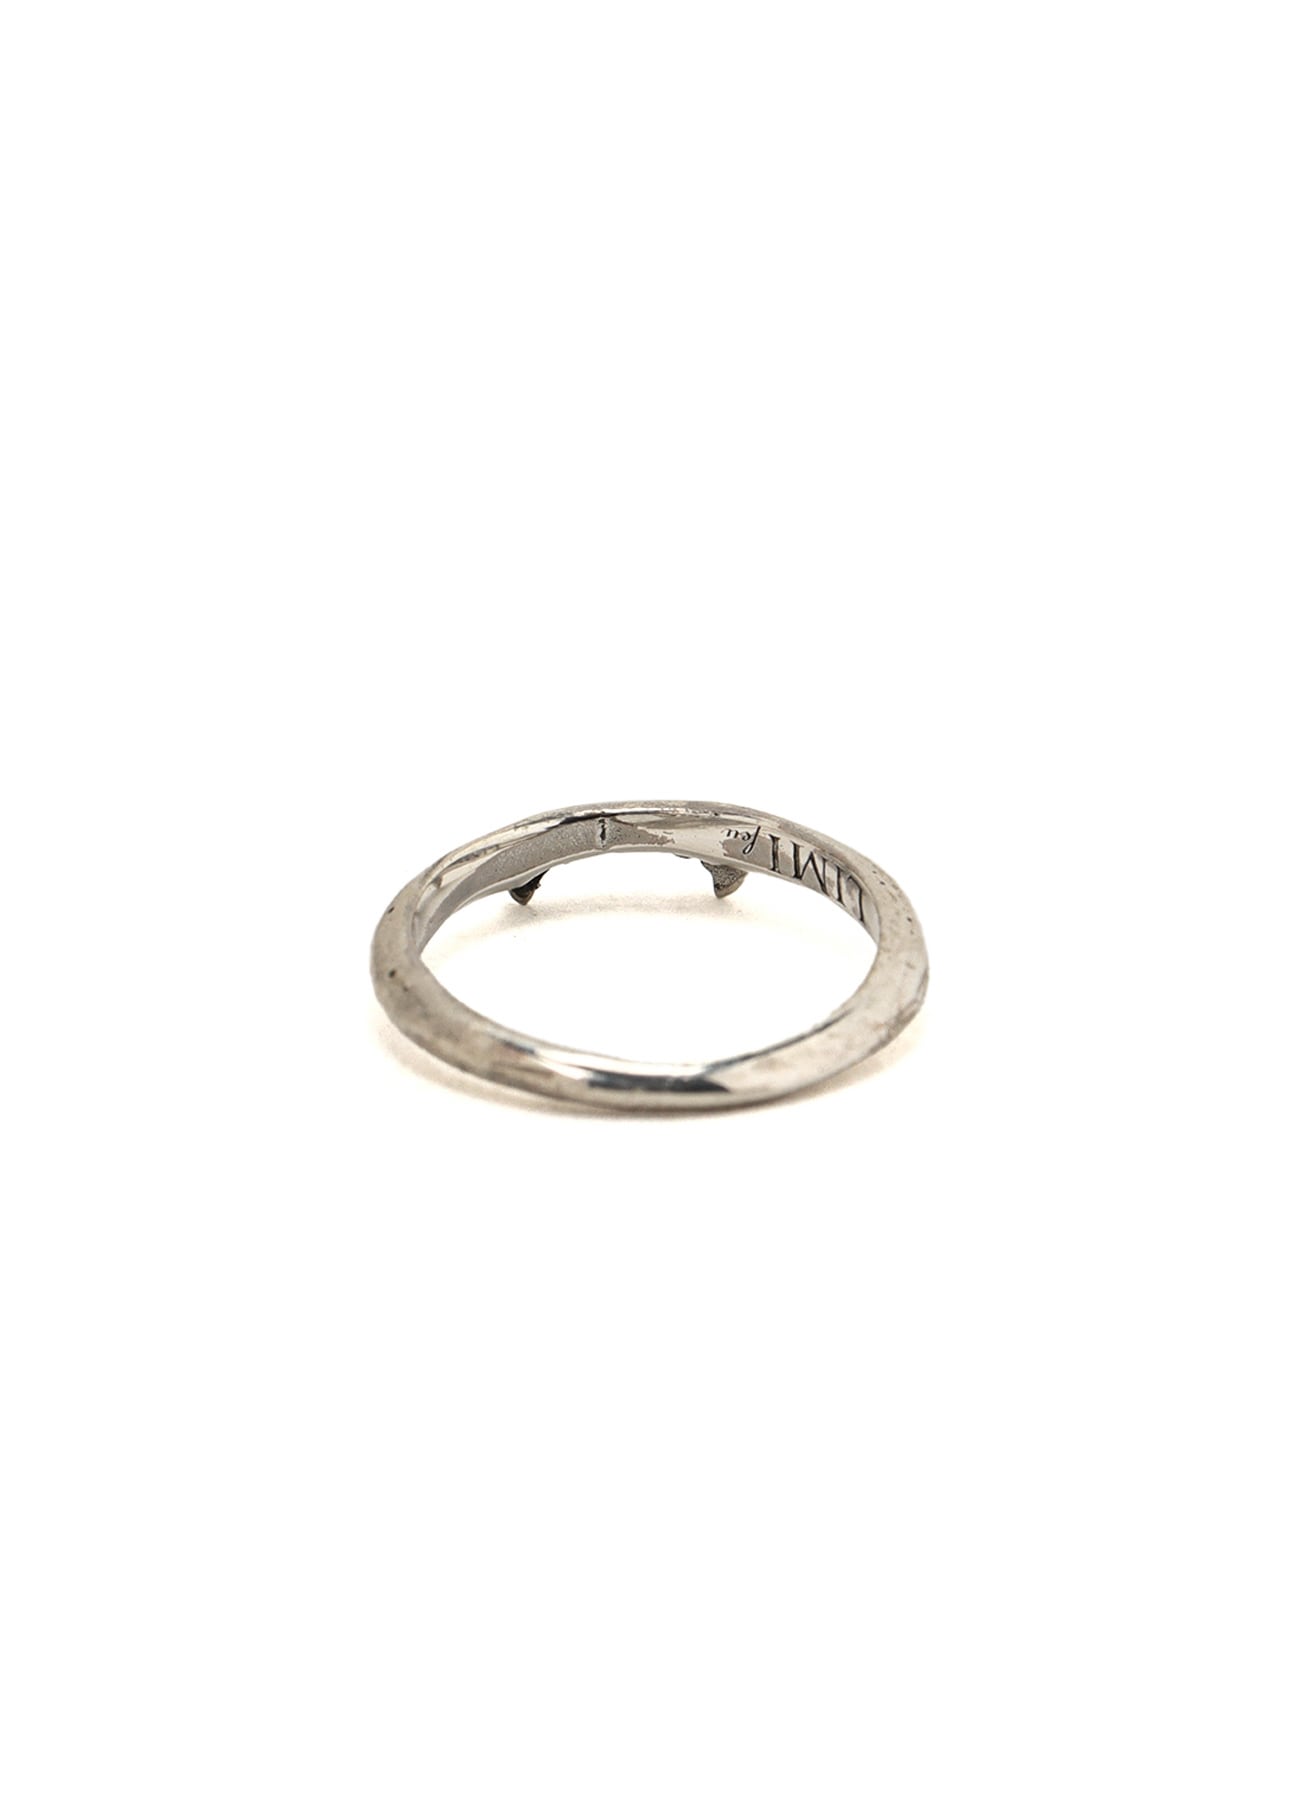 SILVER925 CAT TOOTH RING